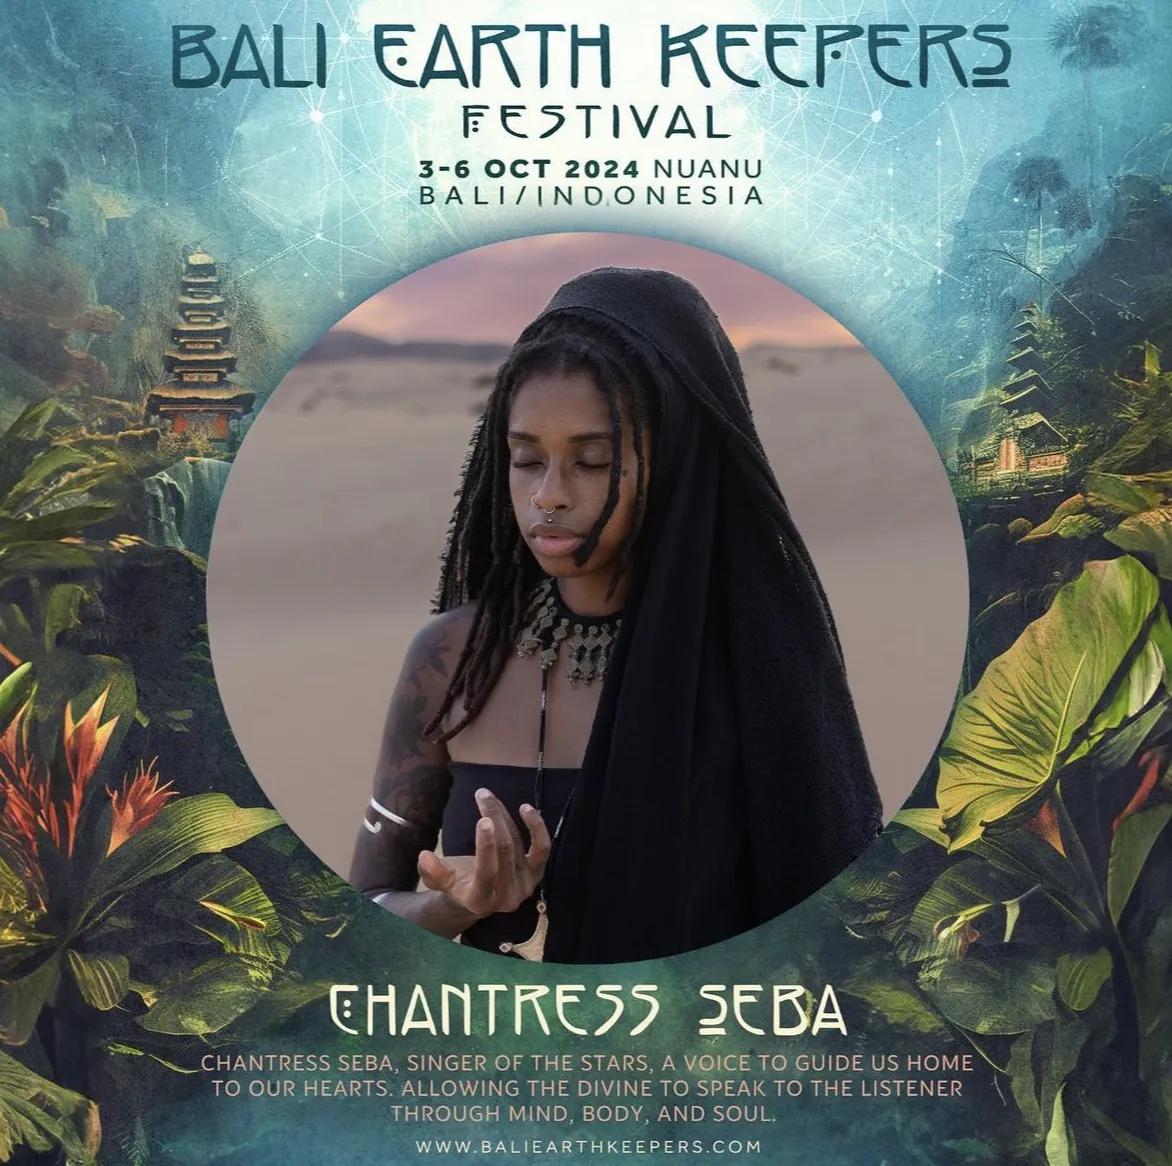 Event at Nuanu Gate everyday in 2024: Bali Earth Keepers